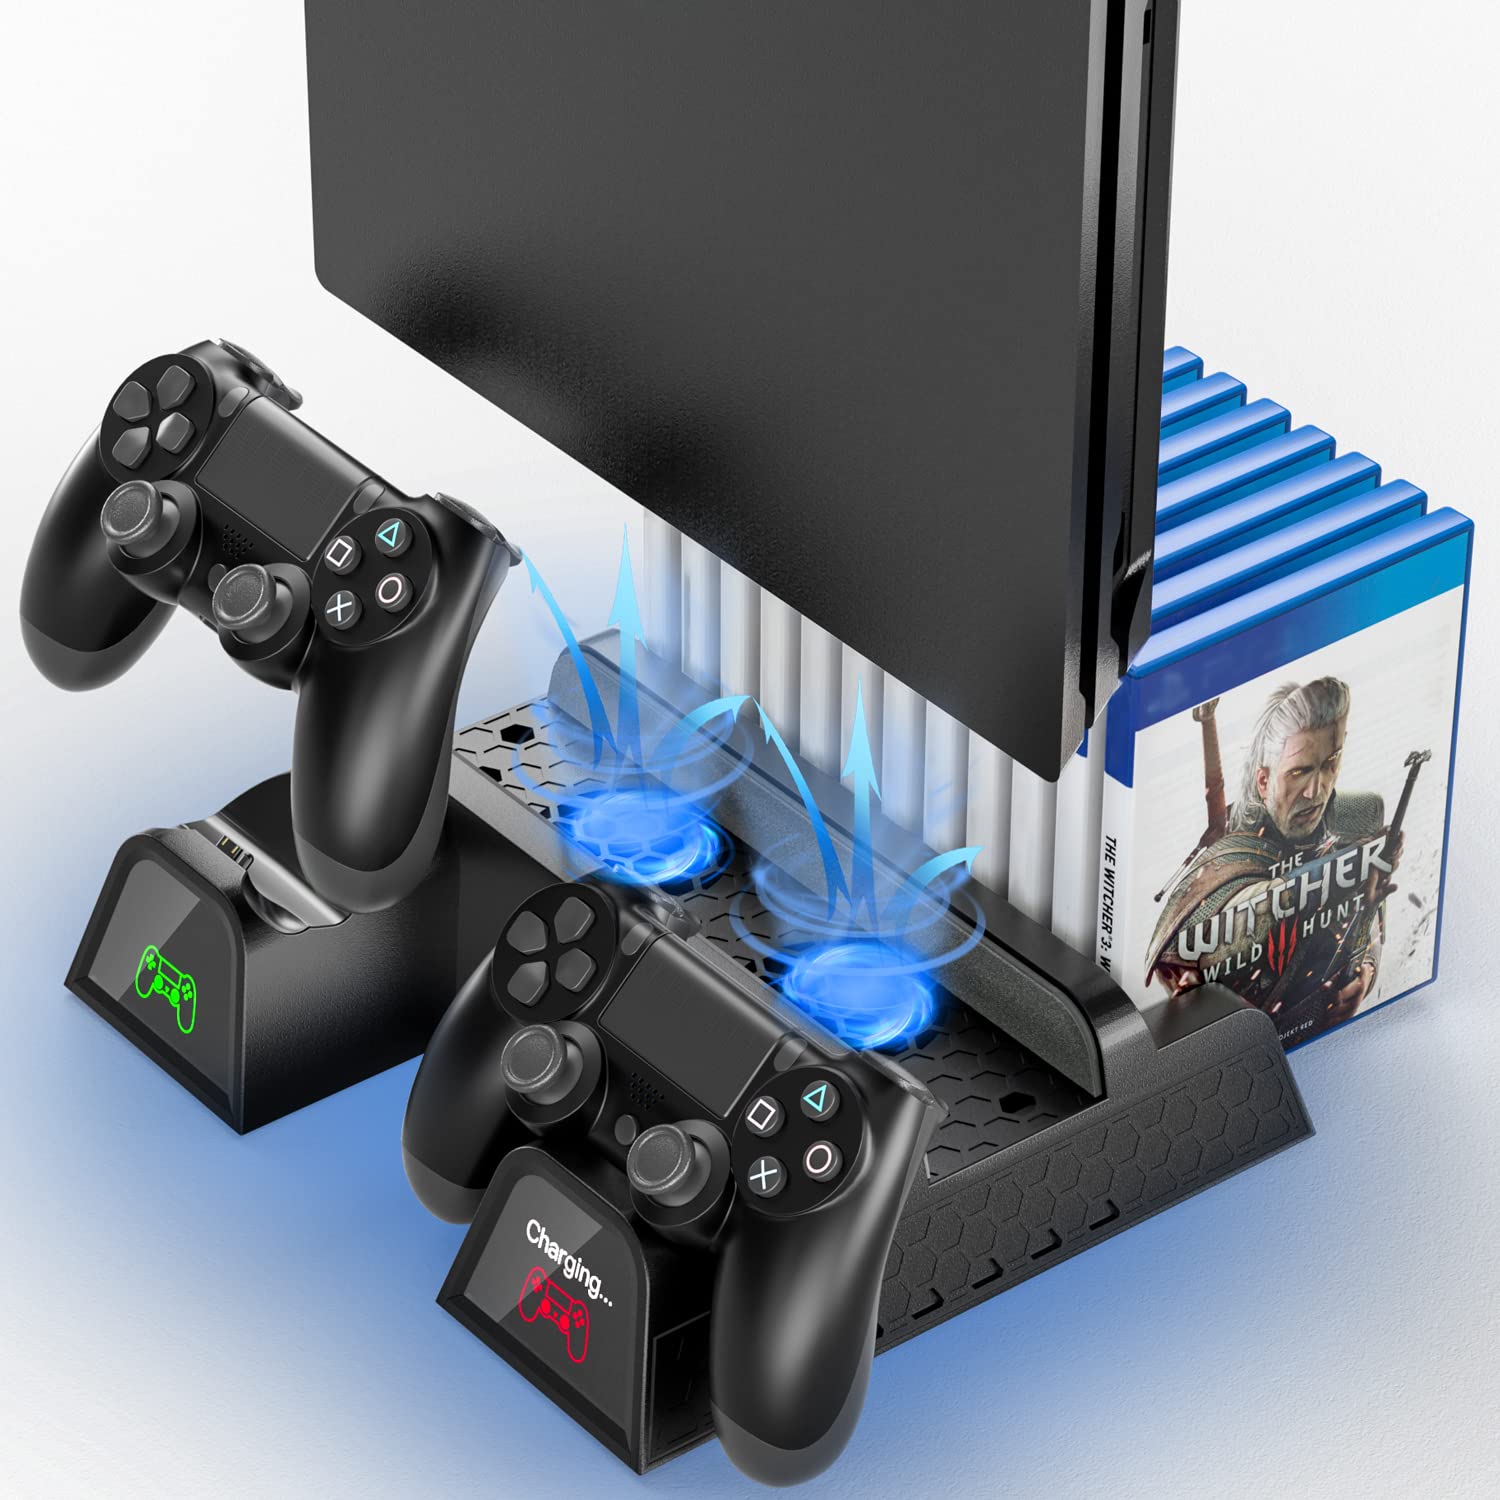 PS4 Pro cooling system